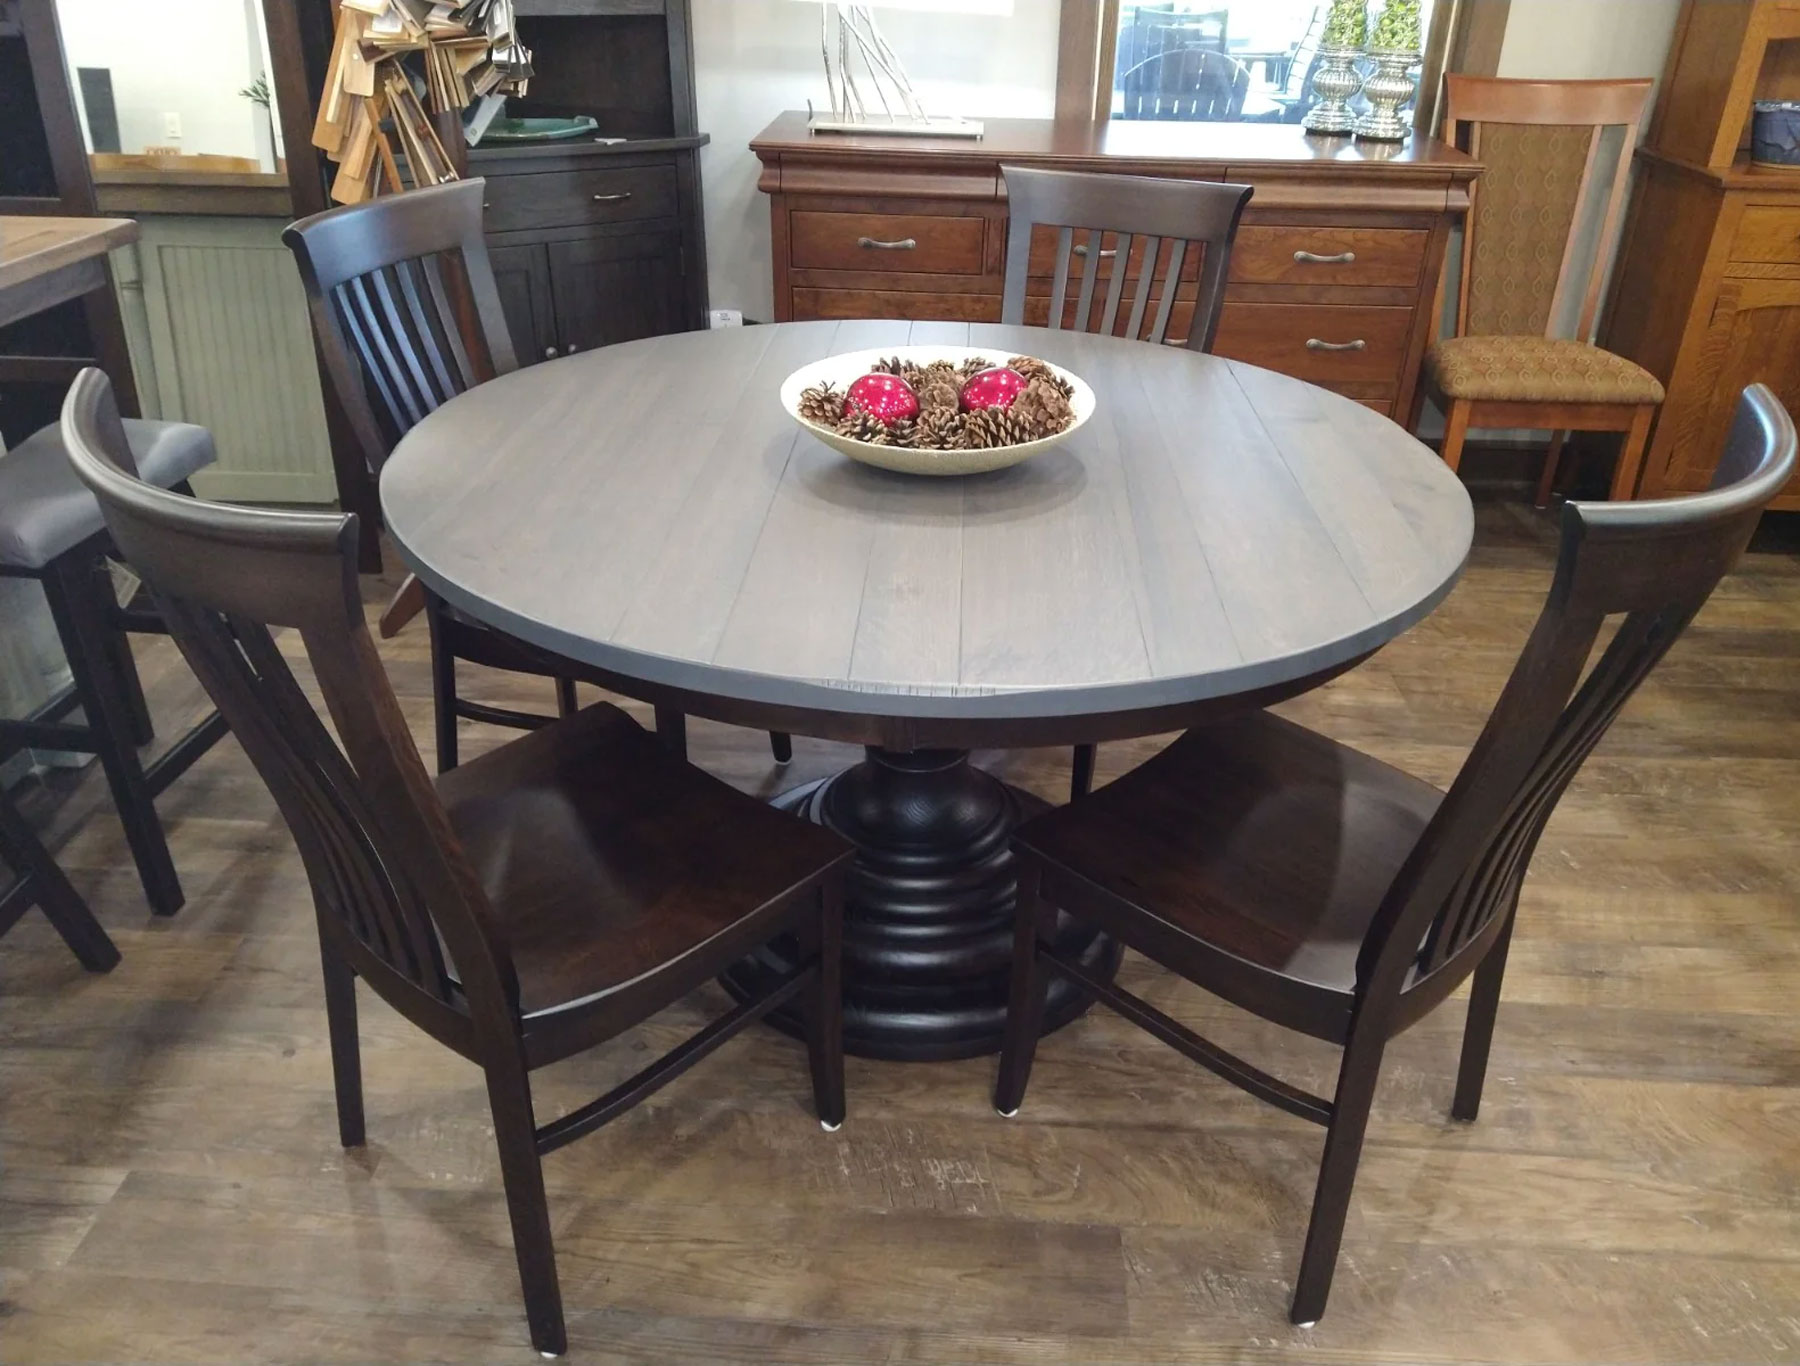 Global 54 inch Single Pedestal Table with (4) Delaney Side Chairs in Rustic Quartersawn White Oak